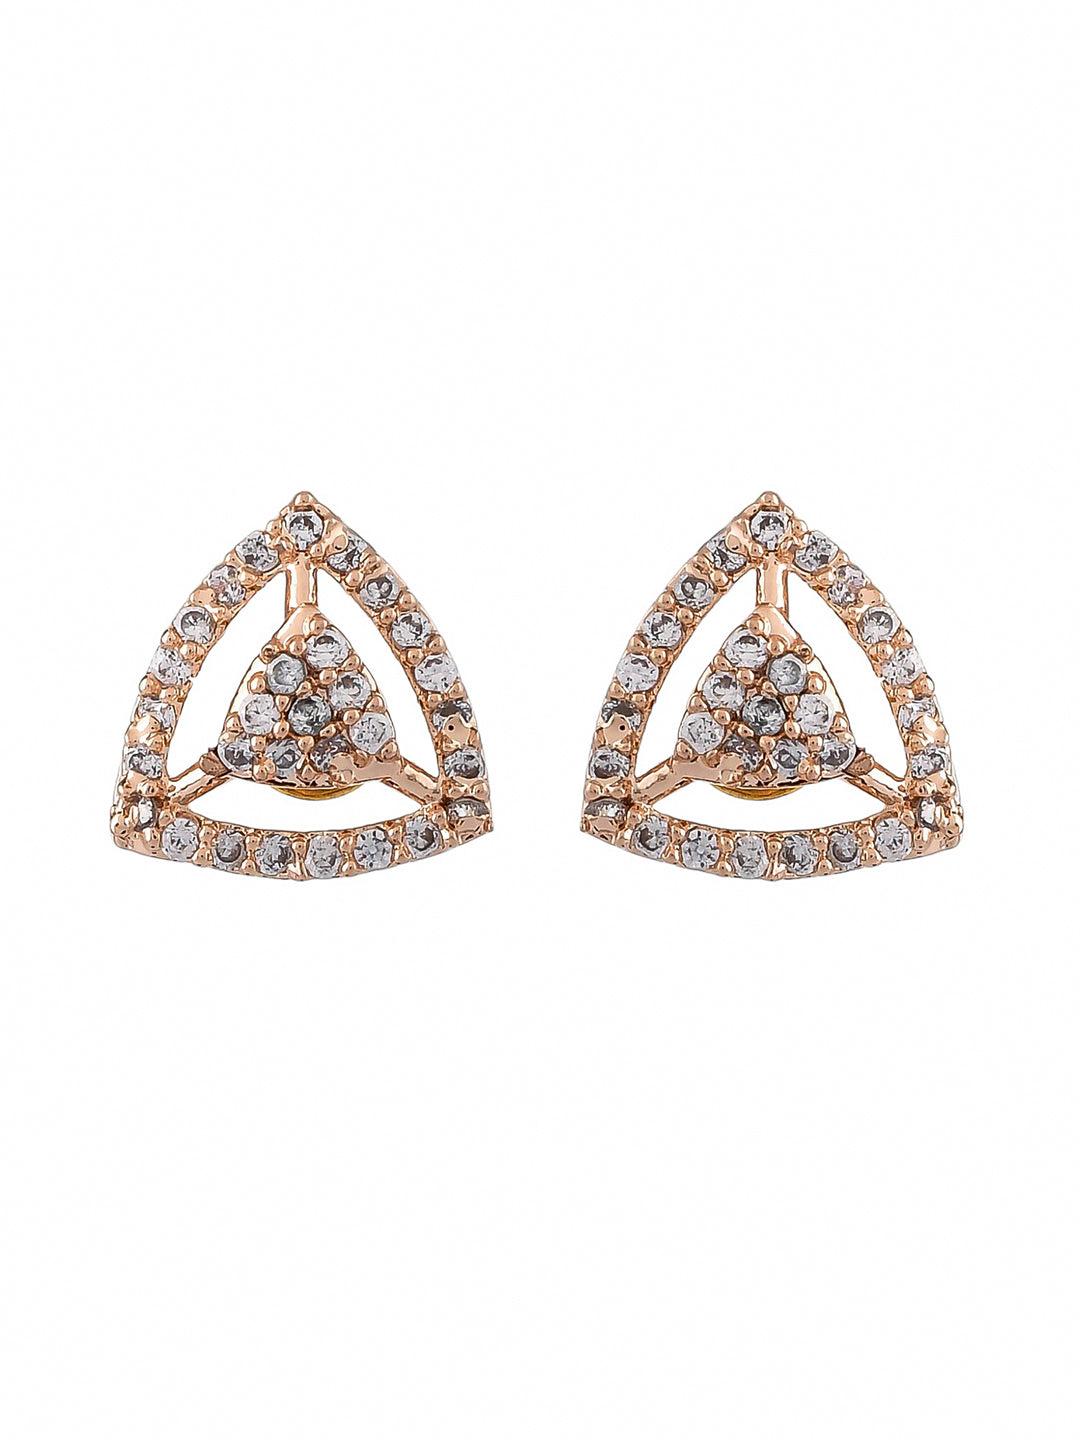 These American Diamond Stud earrings are the perfect addition to any Western outfit for women and girls. The high-quality stones add just the right touch of sparkle, making them a versatile accessory for any occasion.